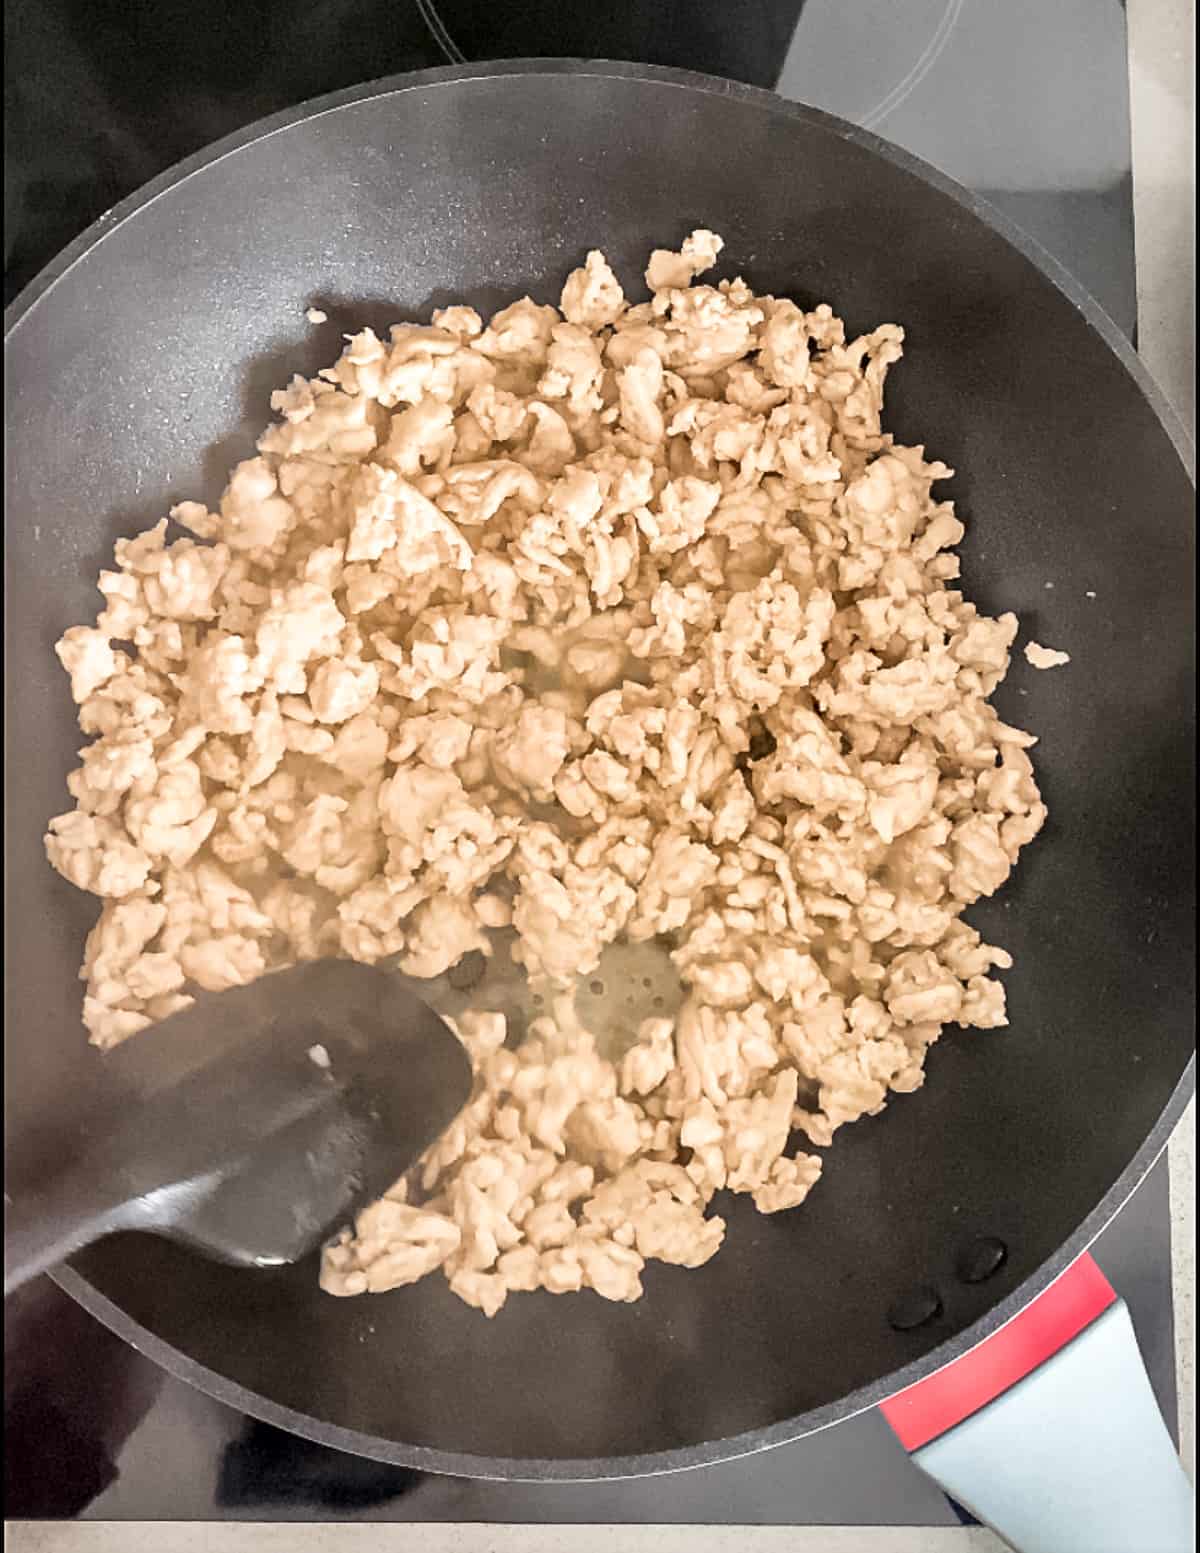 Breaking up larger chunks of turkey mince in a pan.